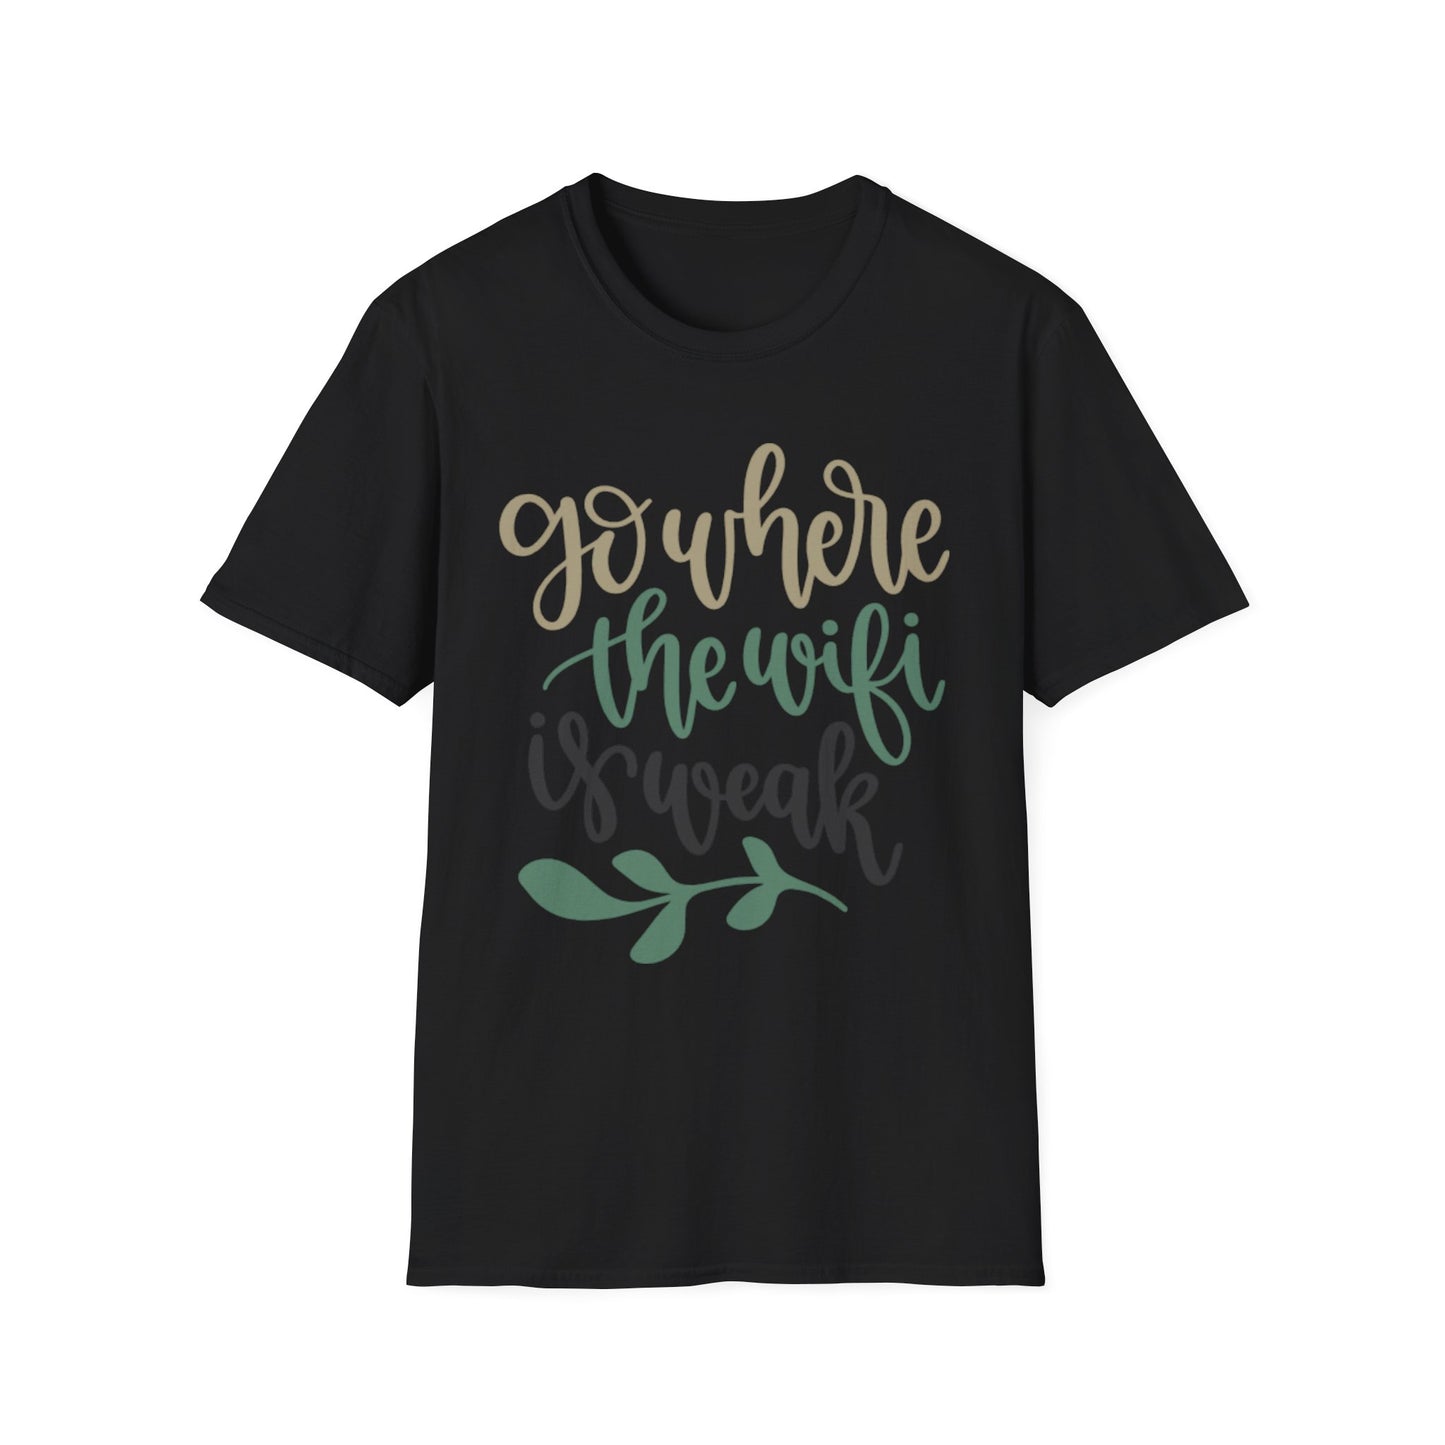 Go where the WIFI is weak - Unisex Softstyle T-Shirt